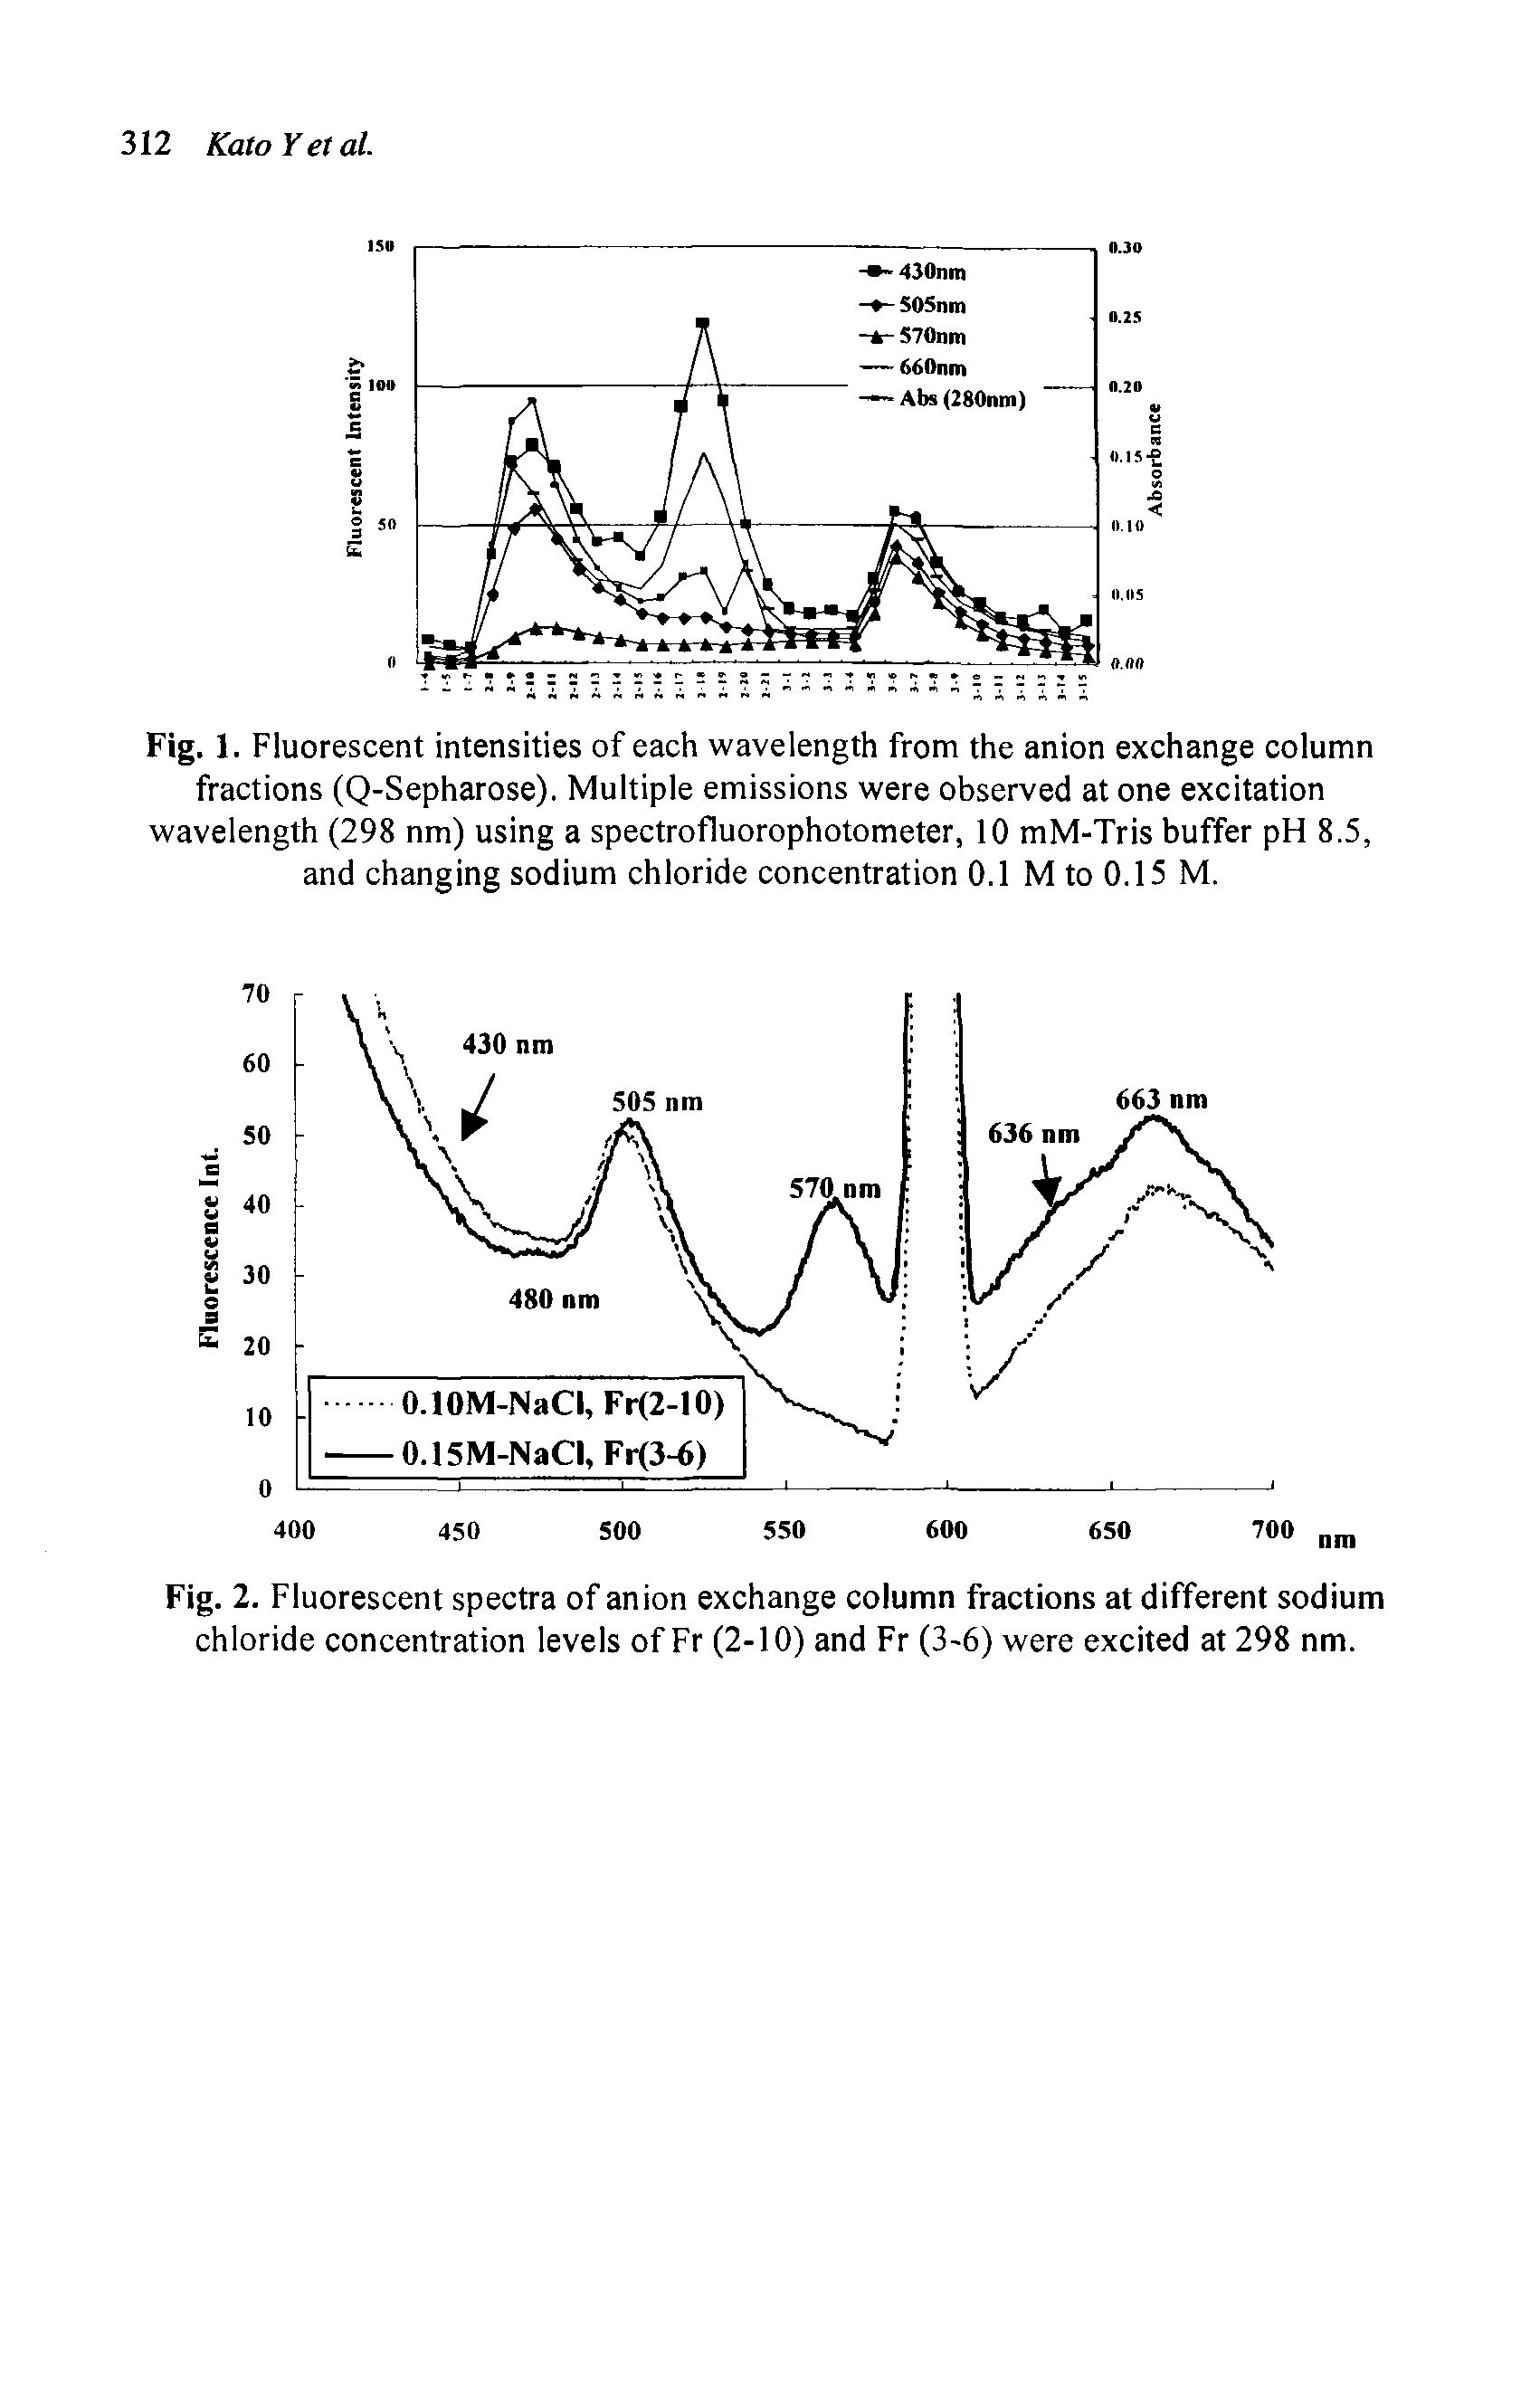 Fig. 1. Fluorescent intensities of each wavelength from the anion exchange column fractions (Q-Sepharose). Multiple emissions were observed at one excitation wavelength (298 nm) using a spectrofluorophotometer, 10 mM-Tris buffer pH 8.5, and changing sodium chloride concentration 0.1 M to 0.15 M.